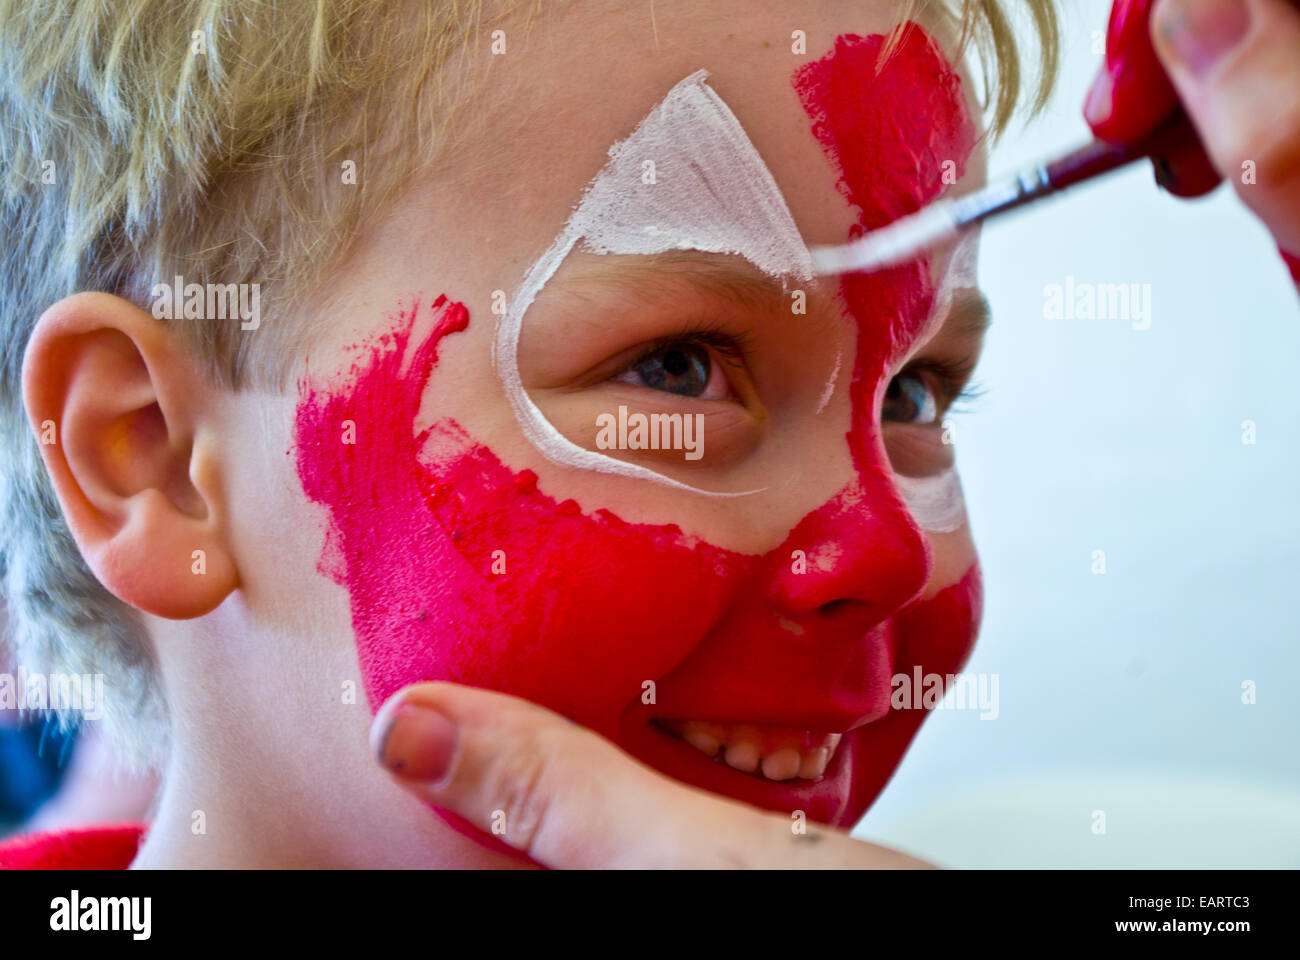 A blonde boy happily has his face painted bright red like spiderman. Stock Photo